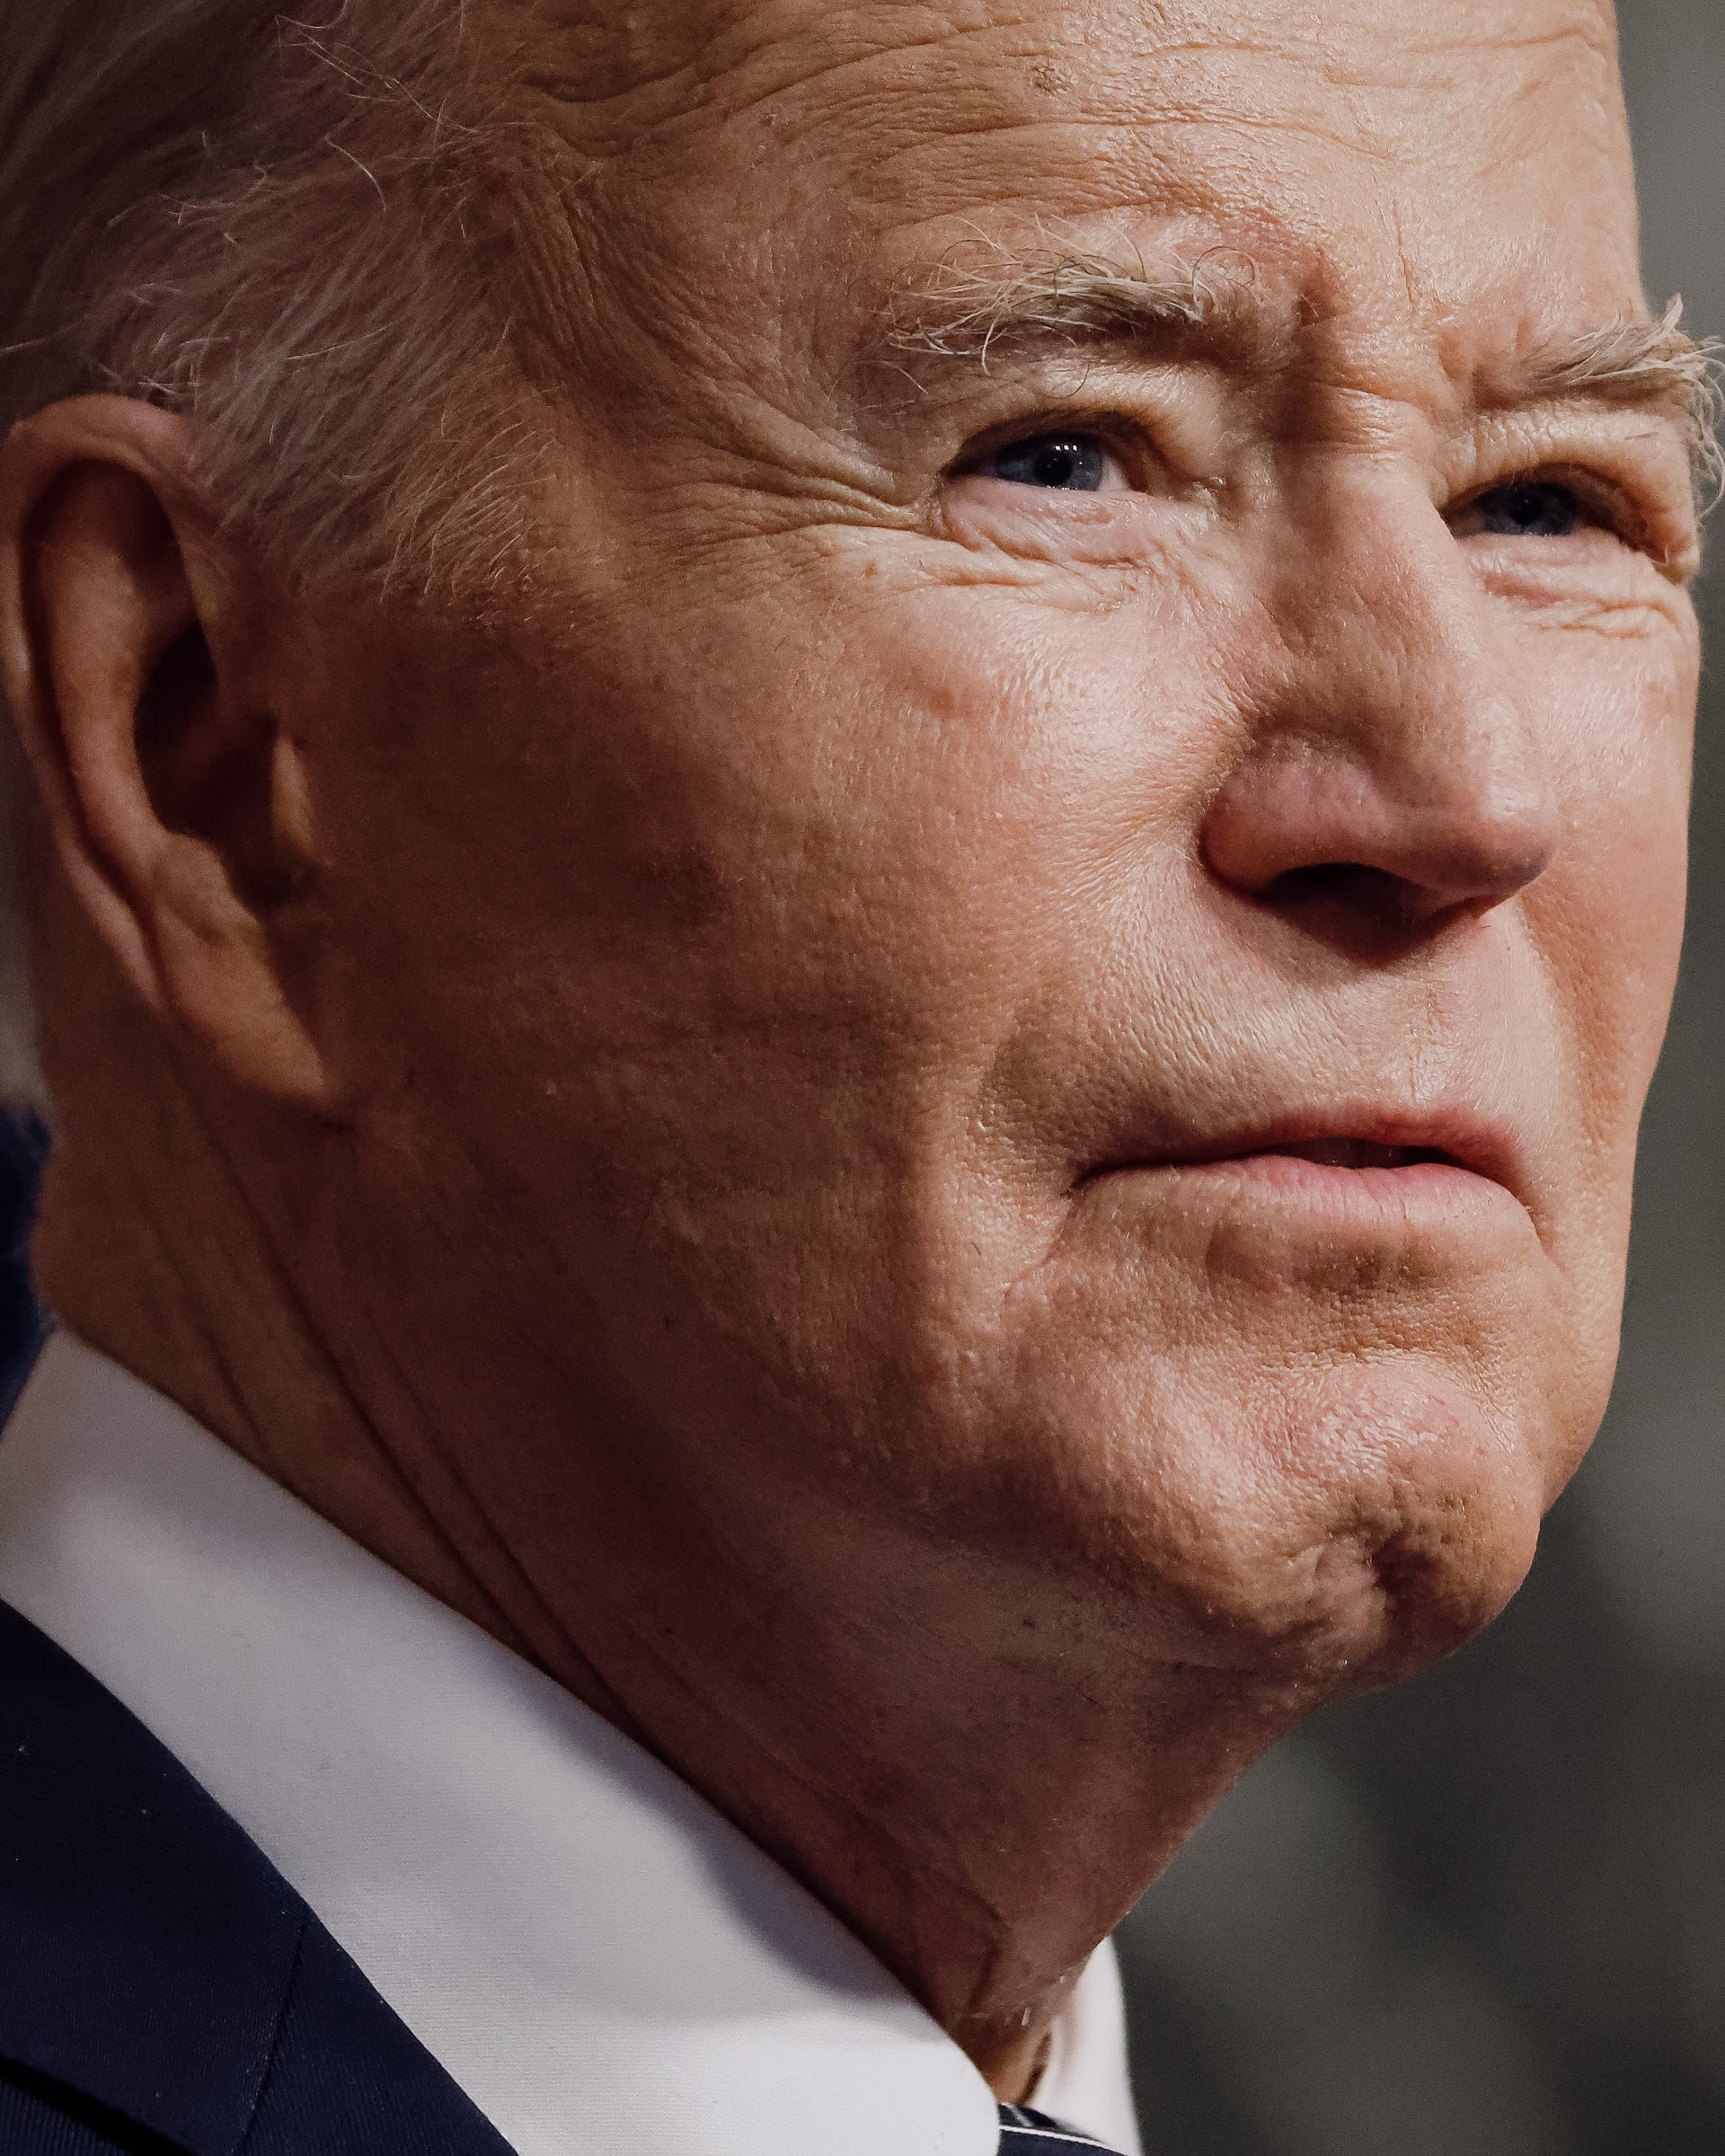 Biden's Decision Upholds One of Our Greatest Presidential Traditions